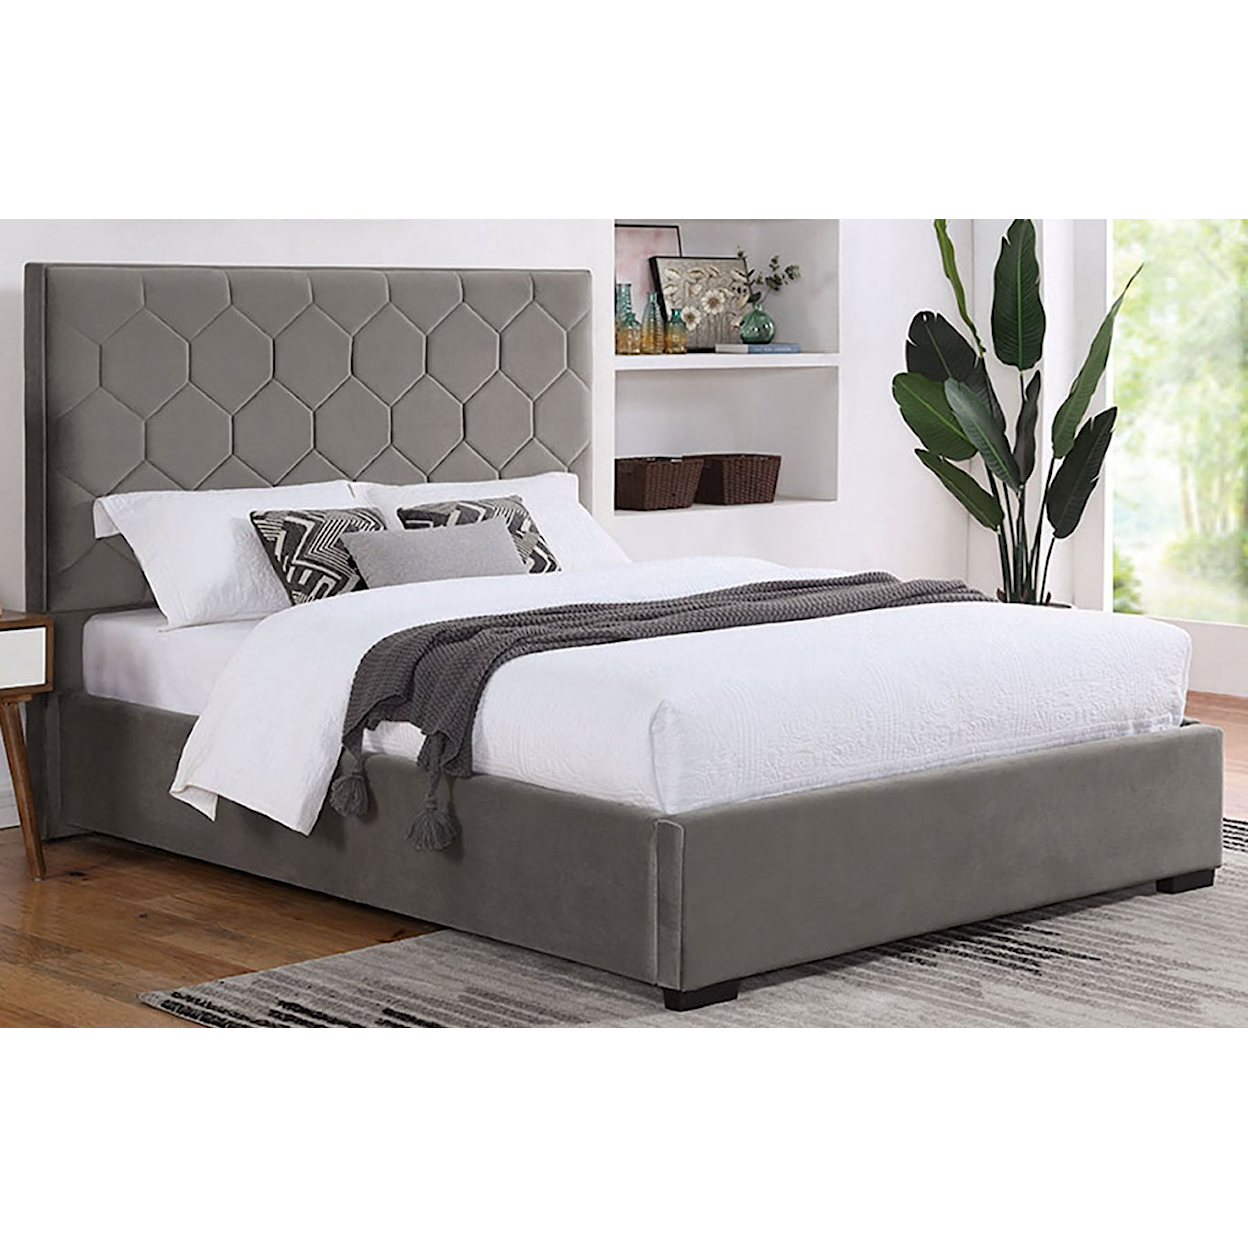 Furniture of America Gatineau Upholstered Queen Bed